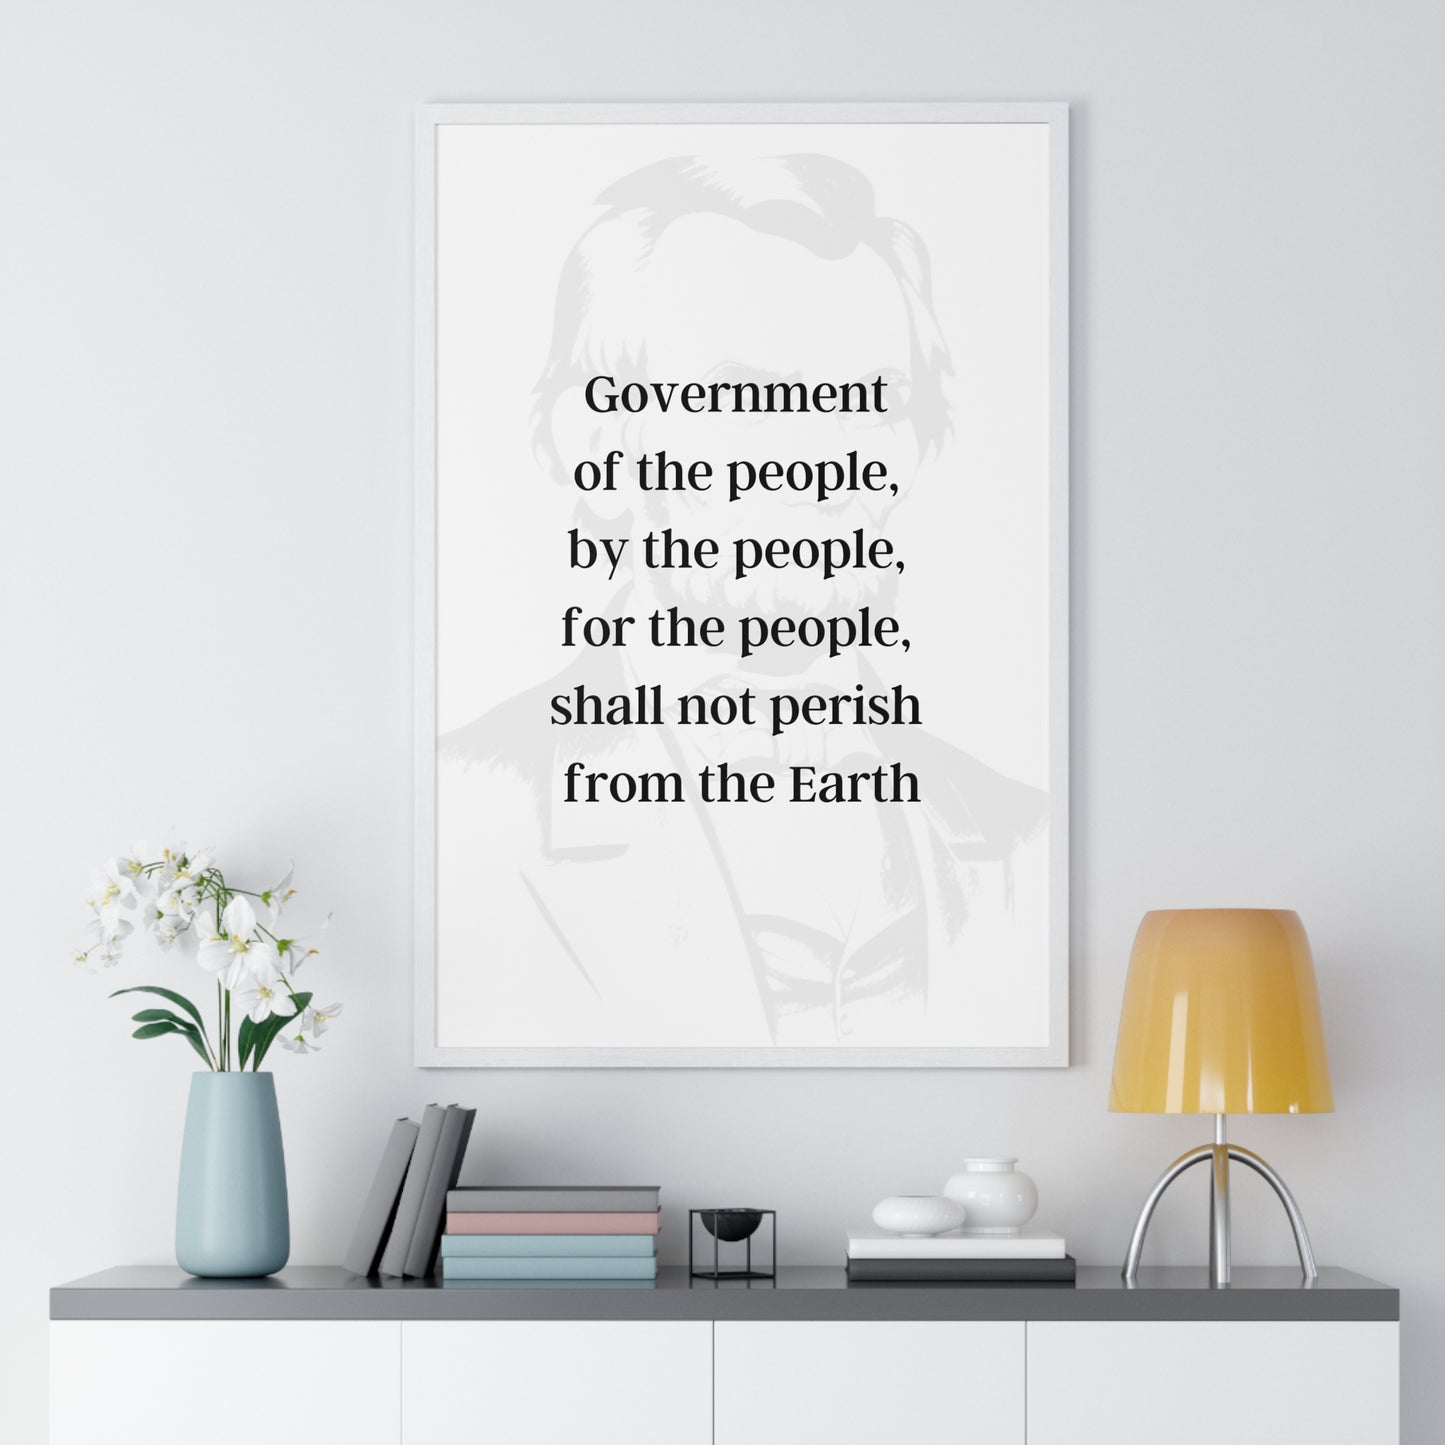 Abraham Lincoln Quote 4, Poster Art, Light Print with Black Lettering, 16th President of the United States, American Patriots, AI Art, Political Art, Poster Prints, Presidential Portraits, Presidential Quotes, Inspirational Quotes